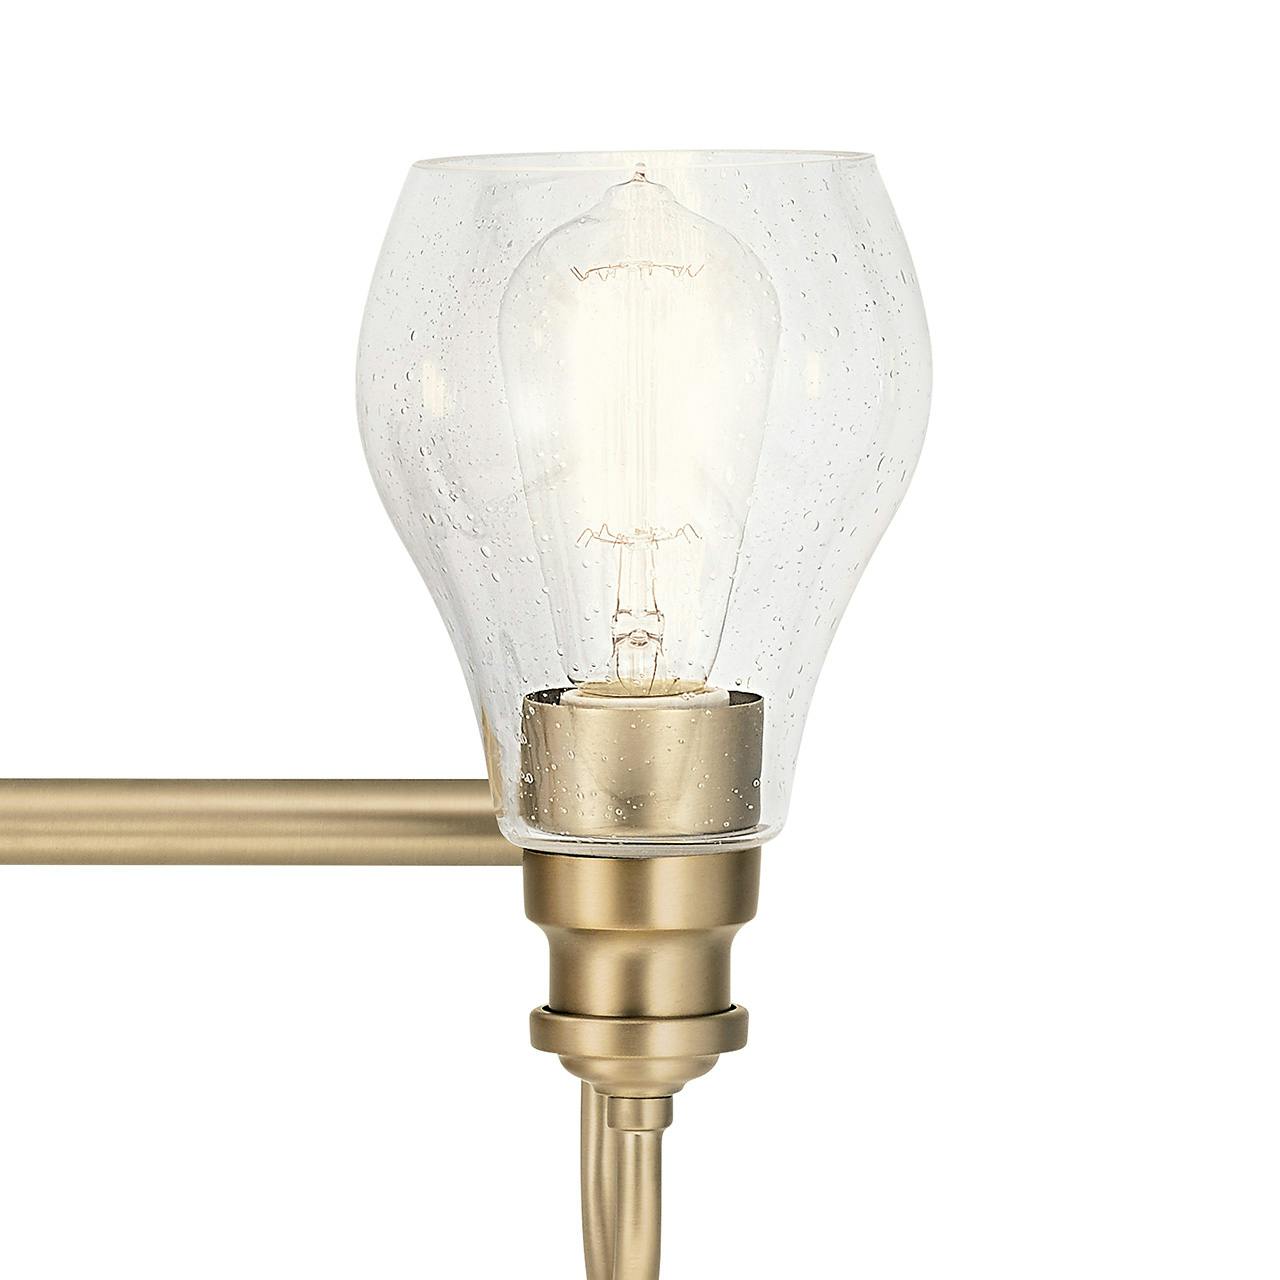 Close up view of the Greenbrier 3 Light Vanity Light Bronze on a white background